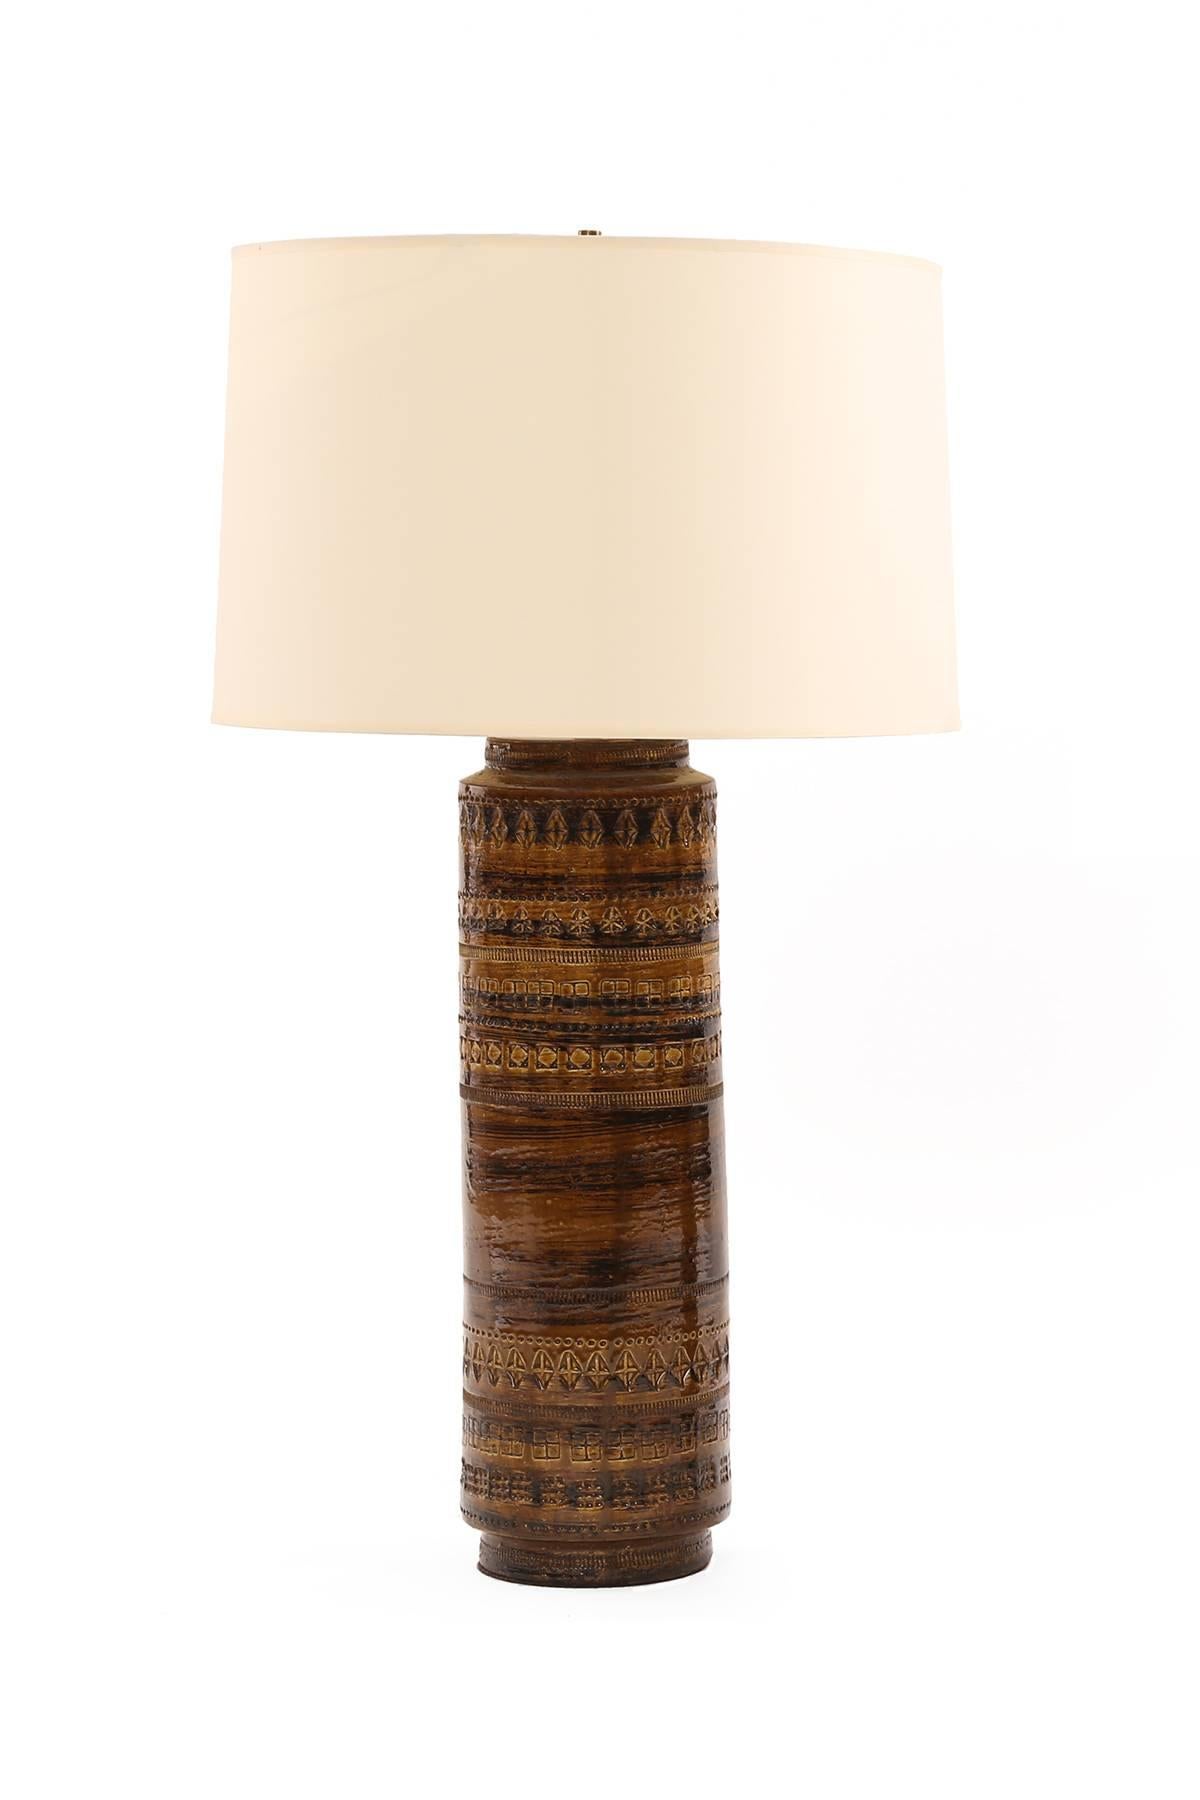 Striking pair of Aldo Londi for Bitossi glazed ceramic lamps, circa late 1960s. These examples have beautiful earth tone glazing and Londi's iconic texture.
Price listed is for the pair without shades. Height listed below is to the top of the